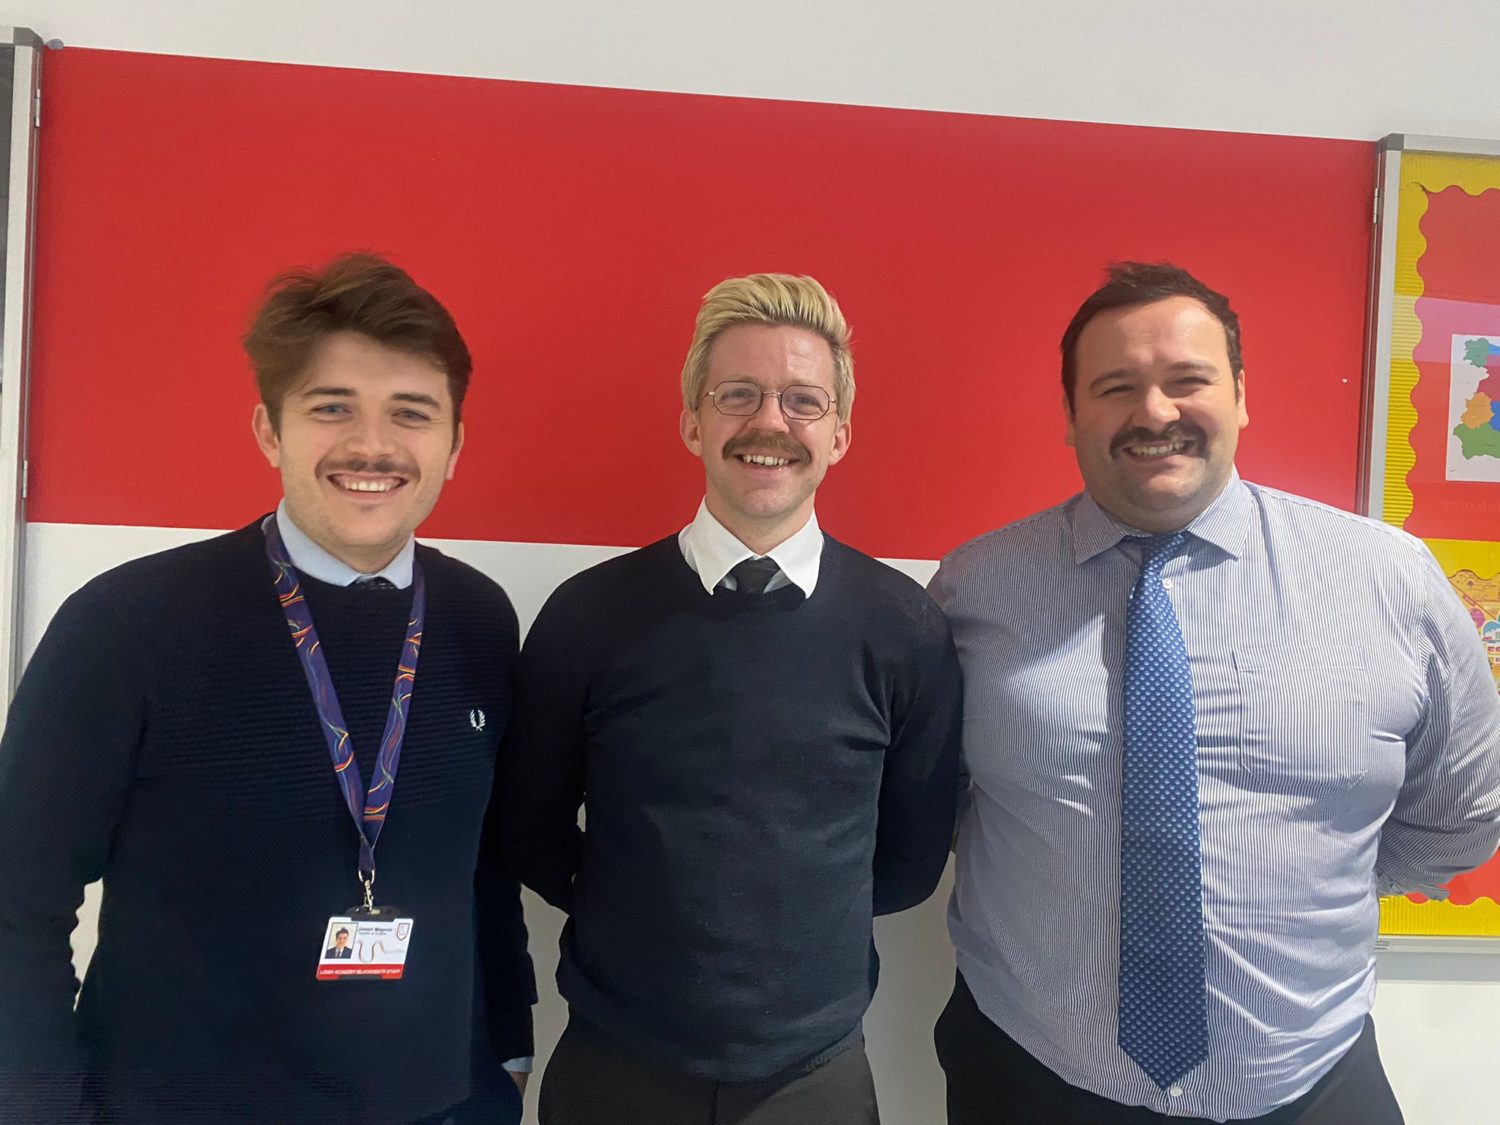 Three male staff members are seen posing together for a photo showing off the moustaches they have grown in support of 'Movember'.